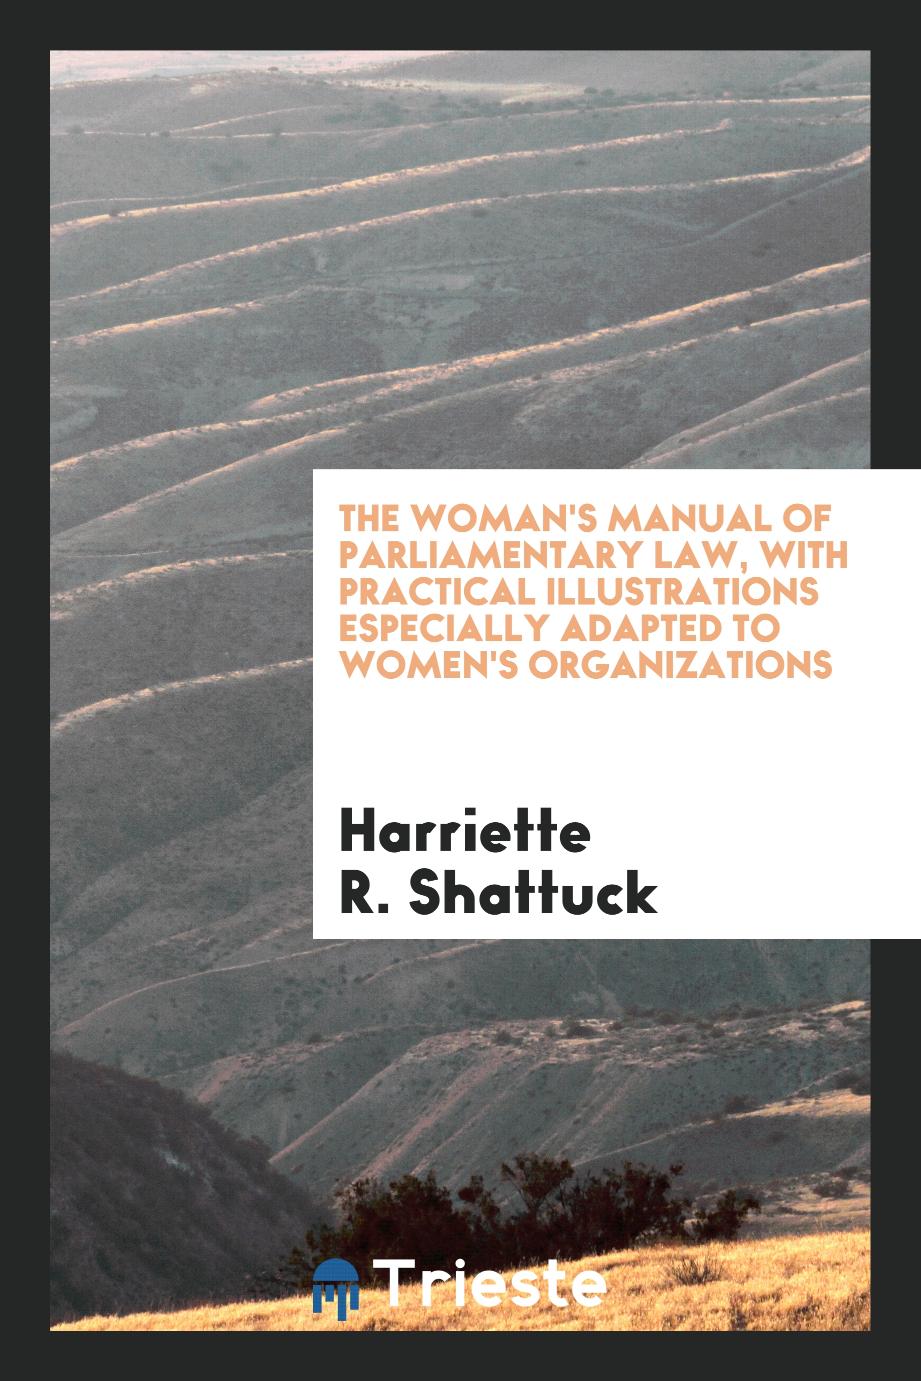 The woman's manual of parliamentary law, with practical illustrations especially adapted to women's organizations